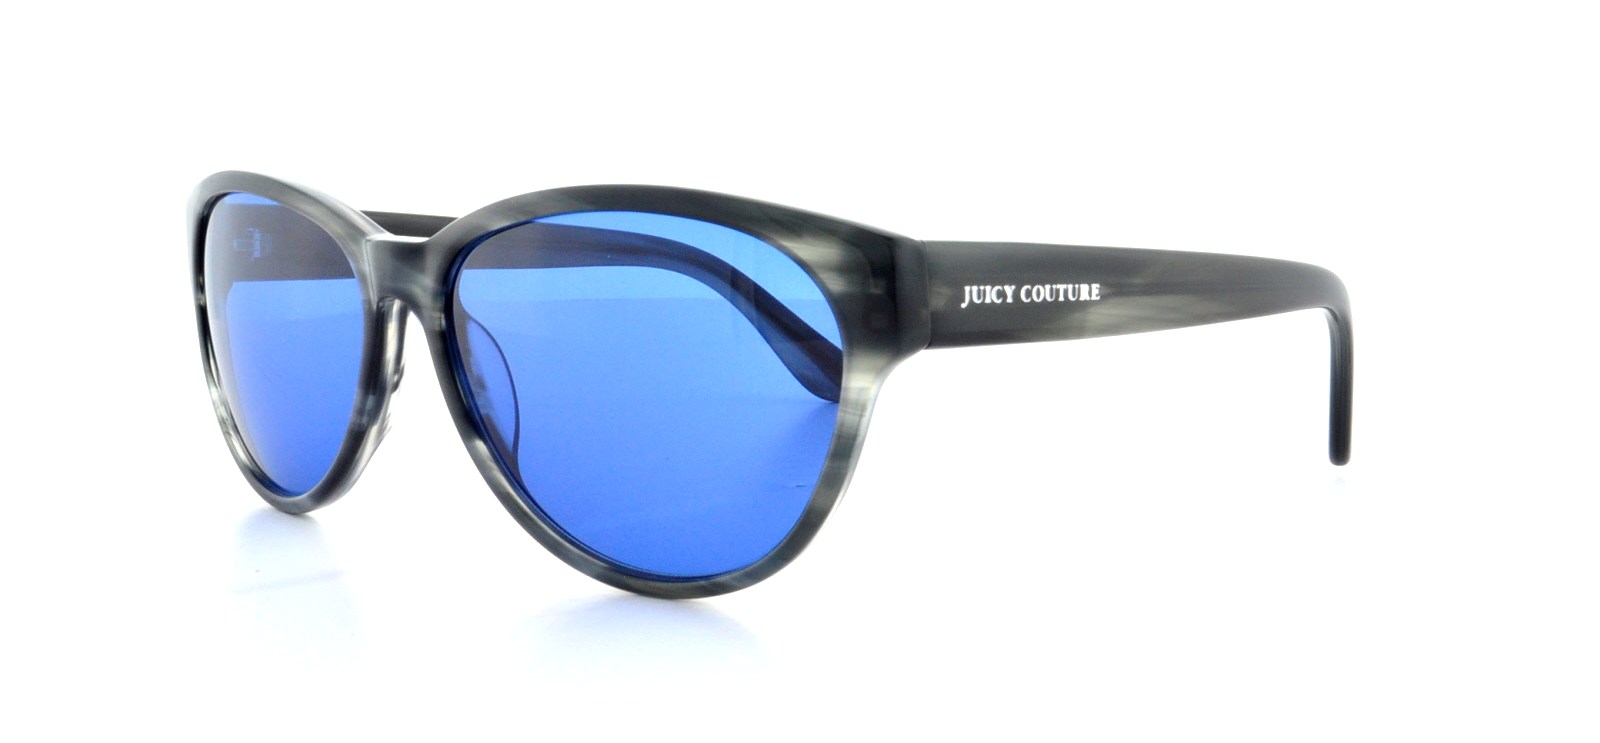 Picture of Juicy Couture Sunglasses 523/S